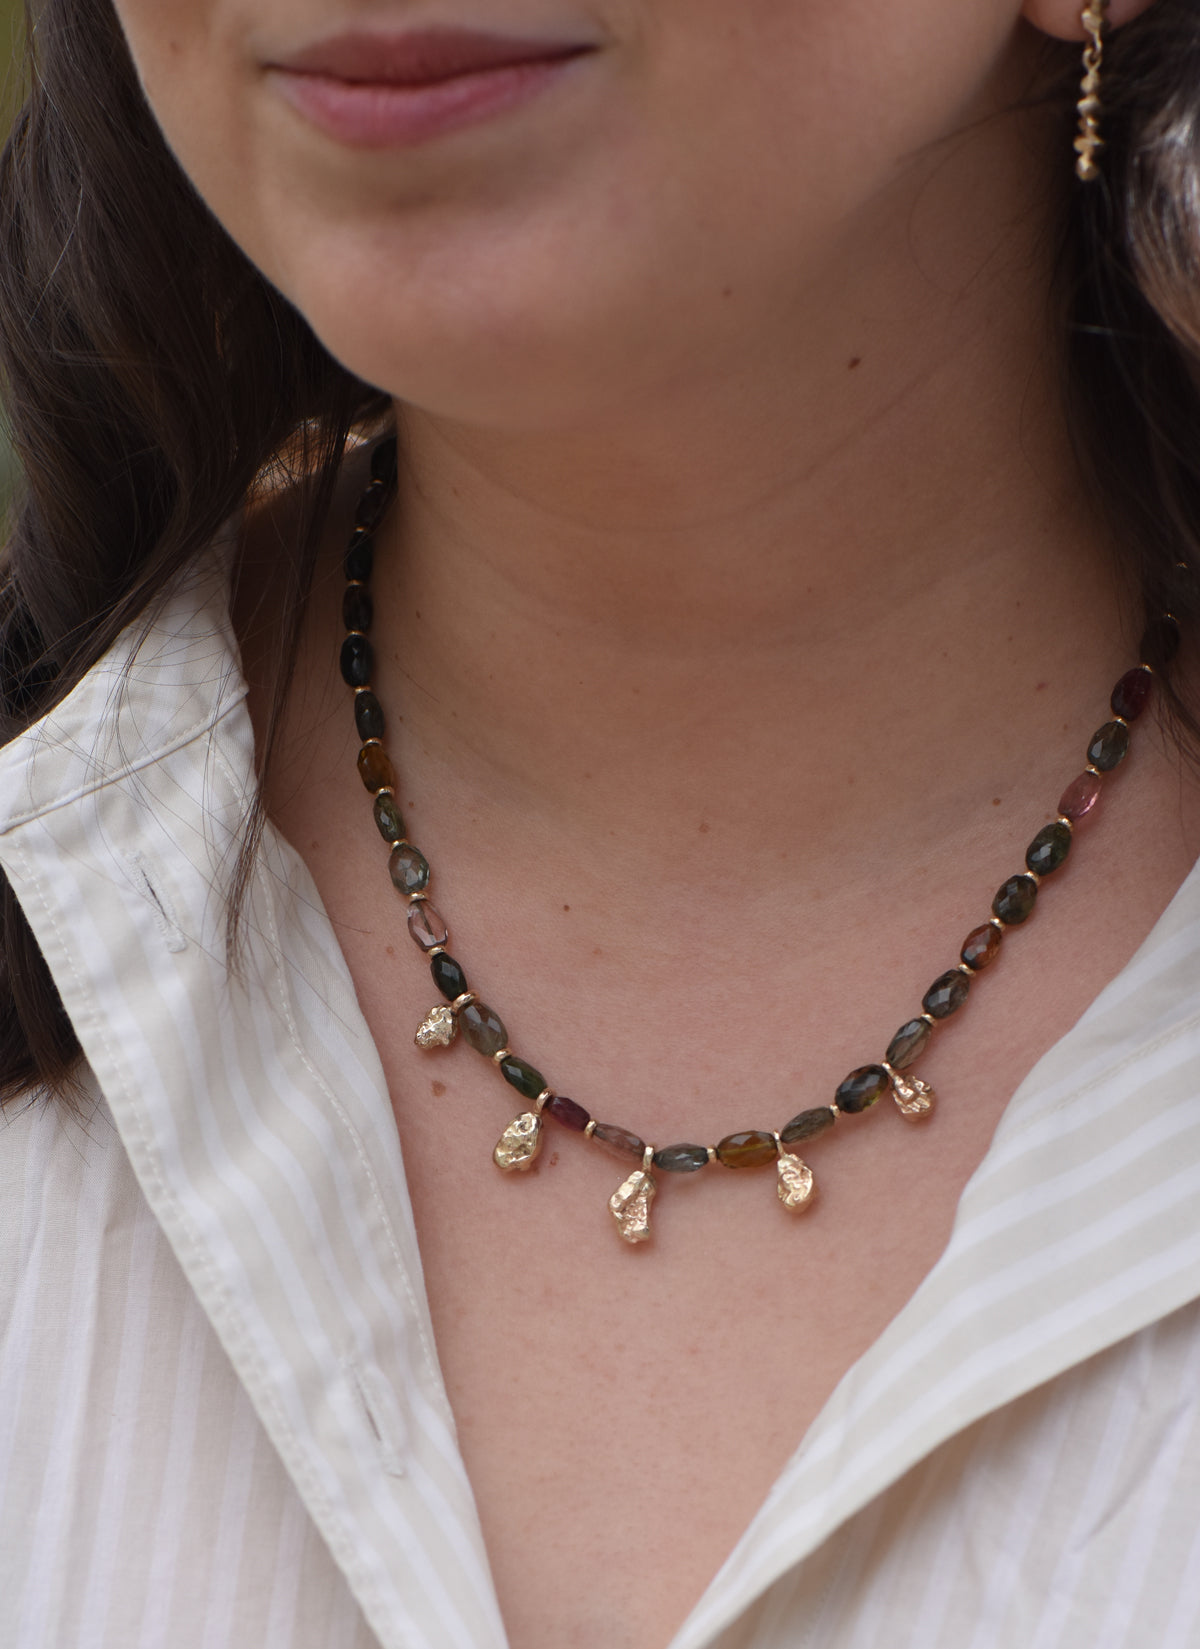 Tourmaline and Golden Nugget Necklace